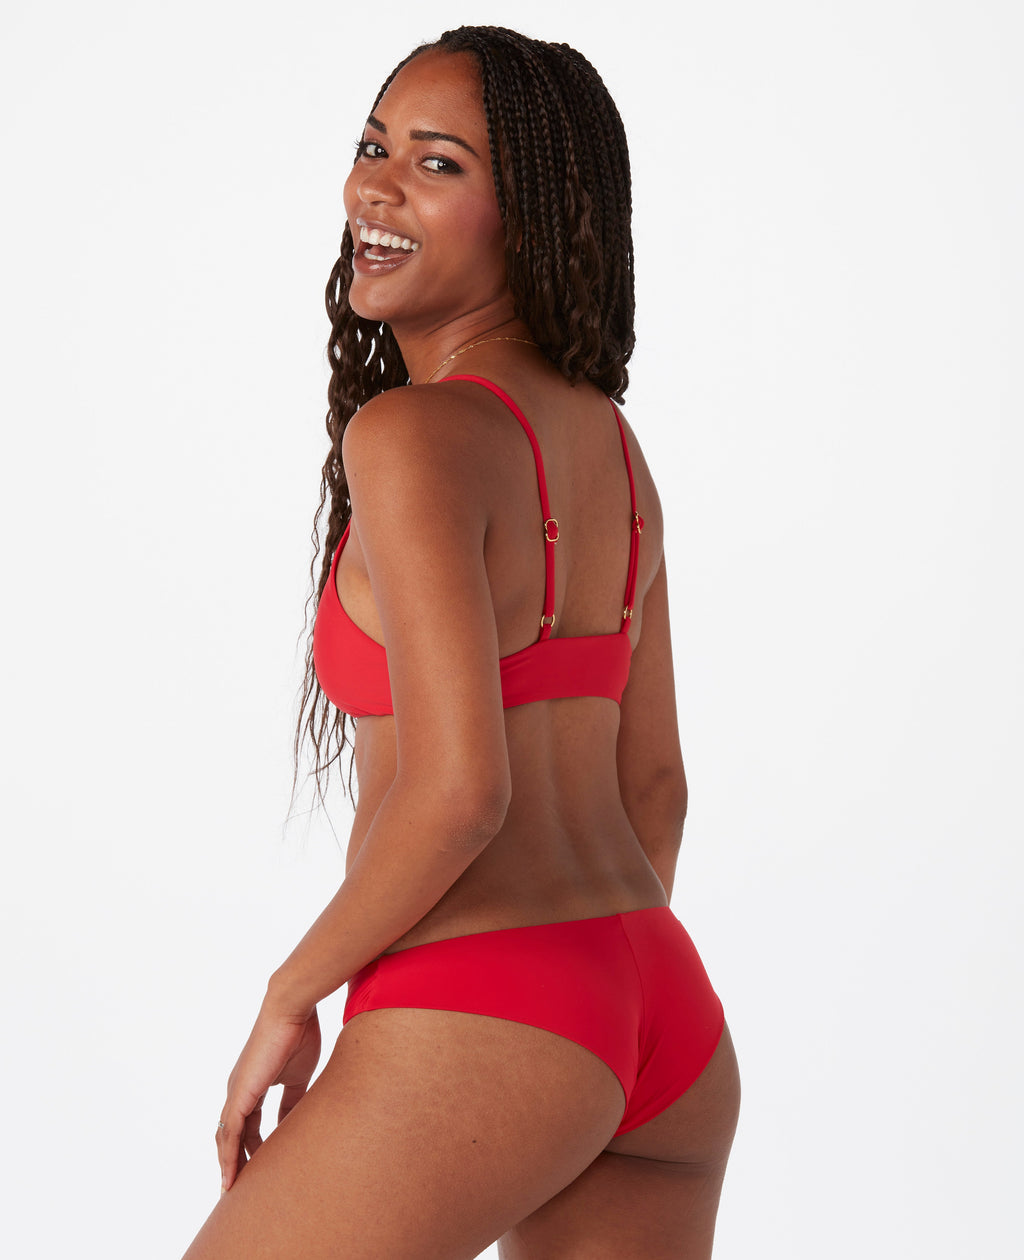 Woman against white background laughing, wearing a bright red bikini.